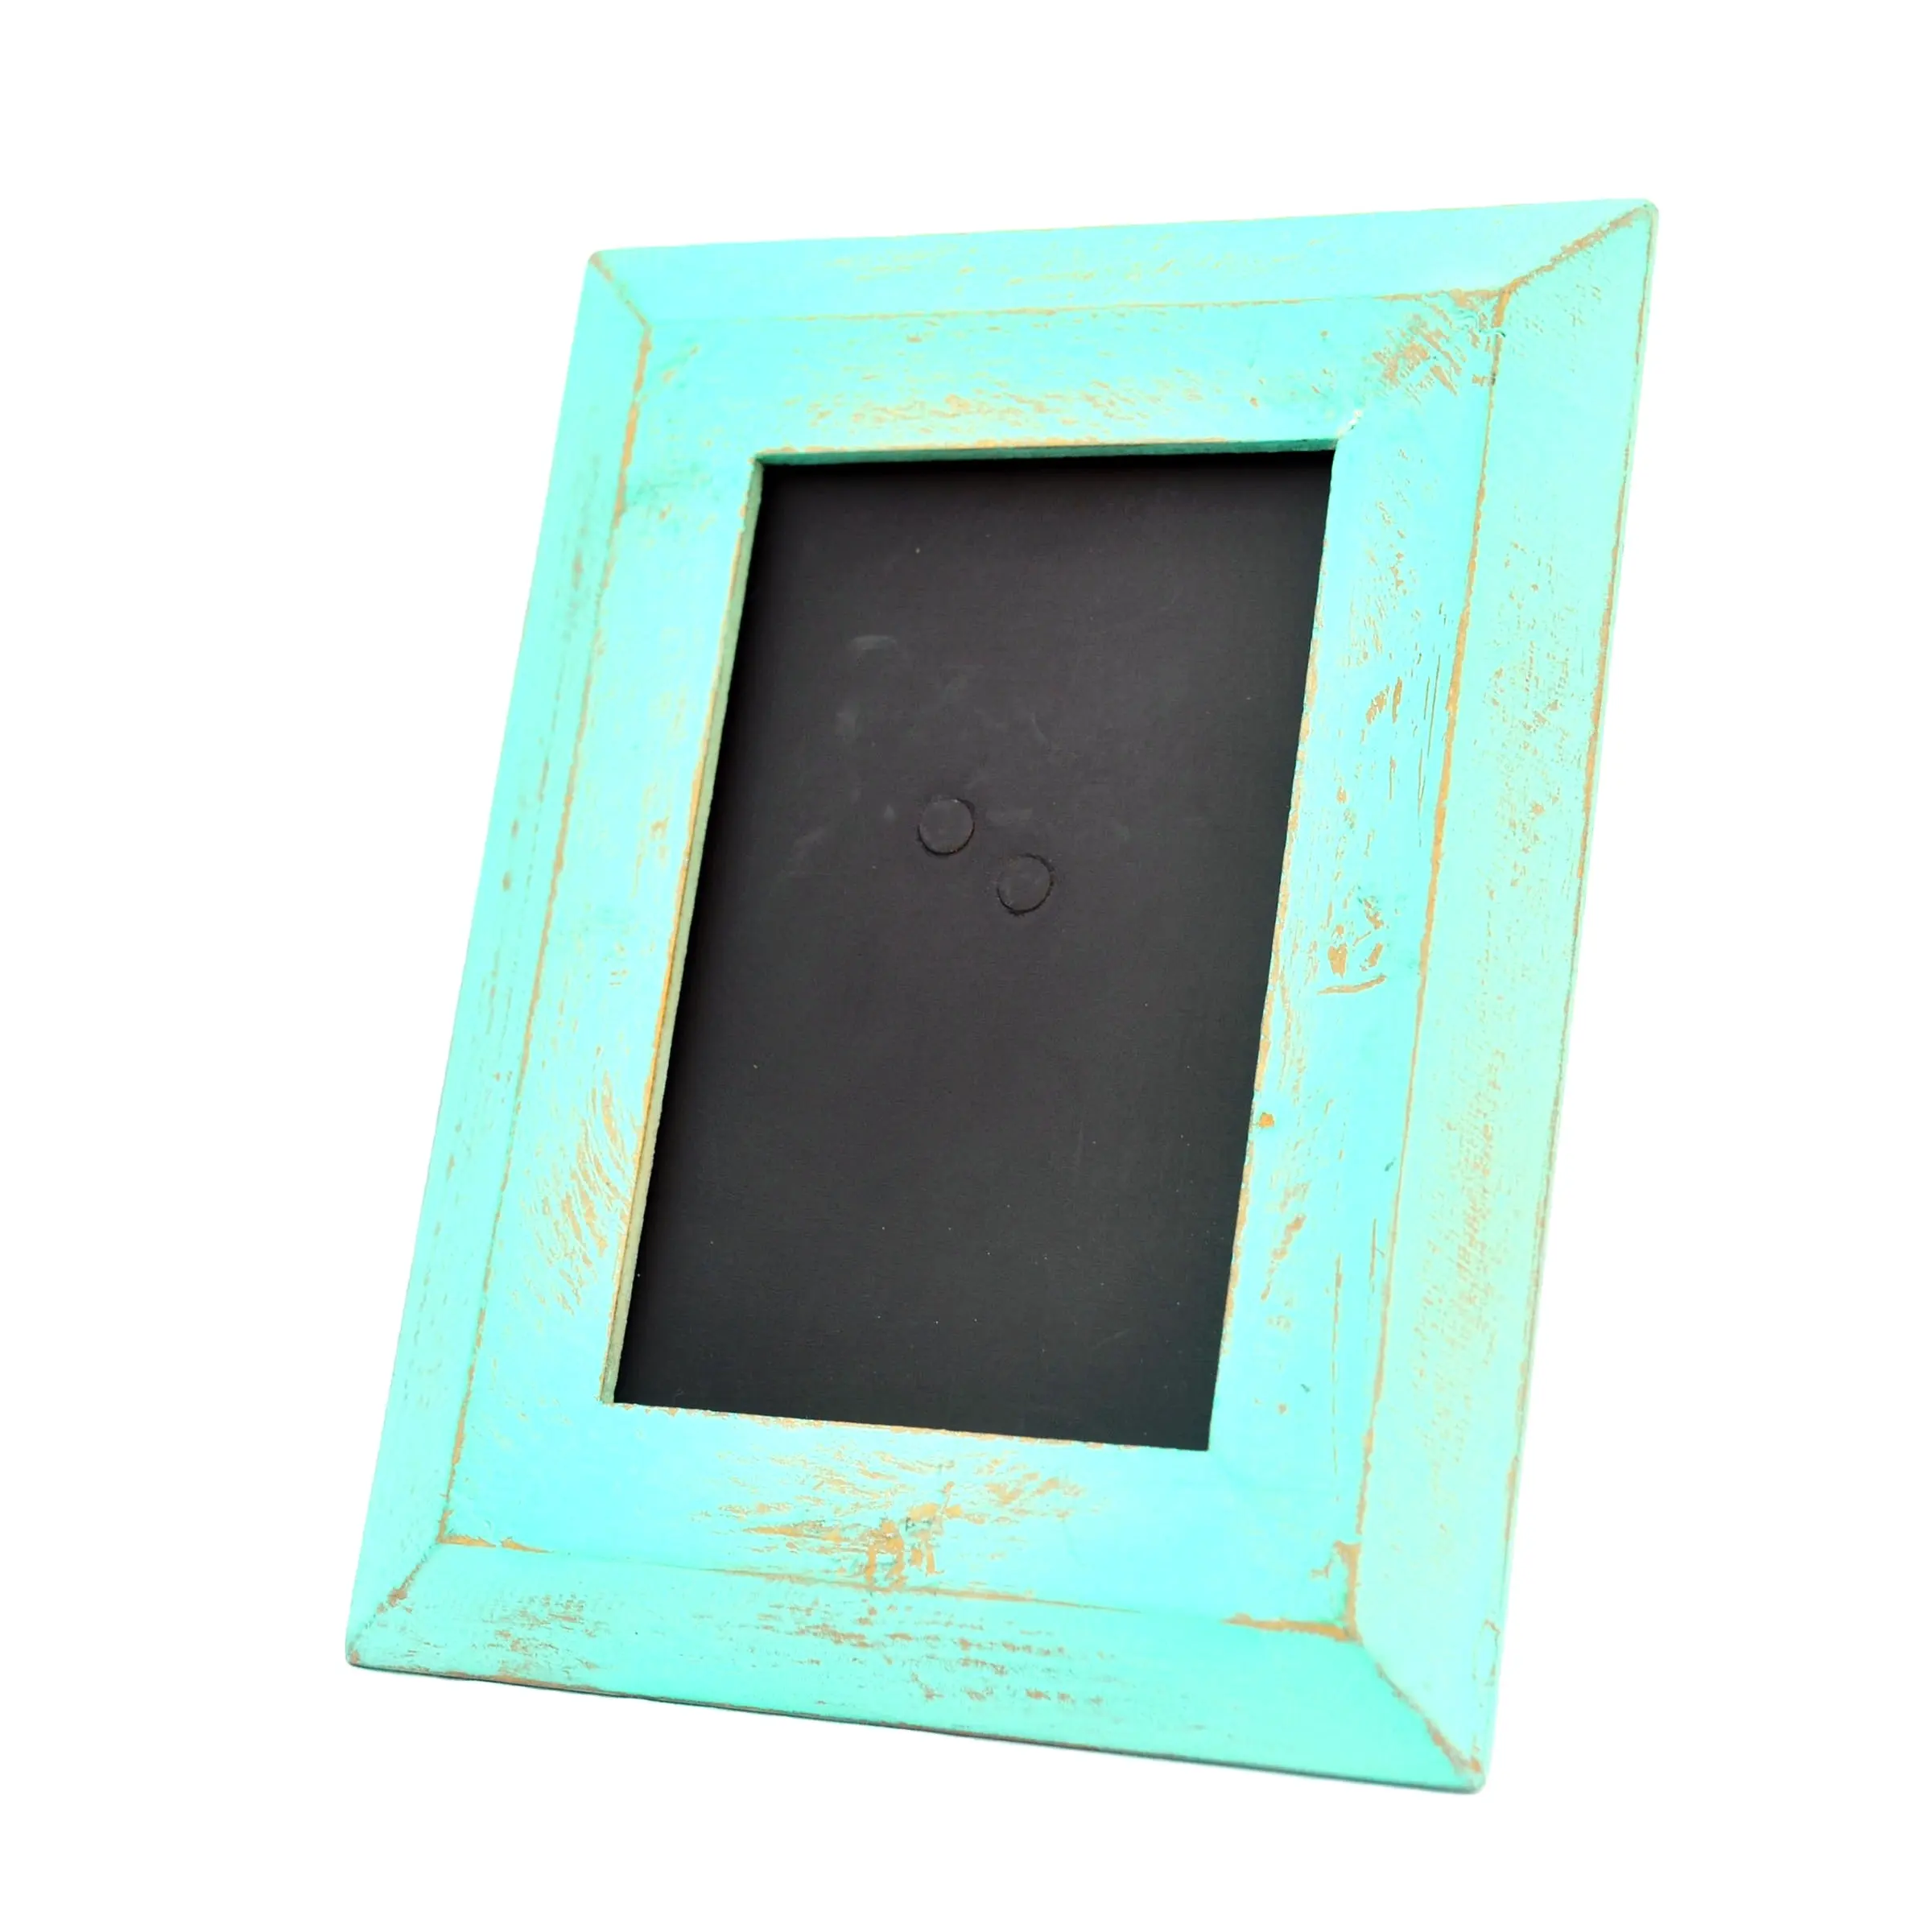 Unique Wooden Photo Frame With Rustic MDF Picture Frame Amazon Best Seller Handcrafted Factory Made With Less Price High Quality